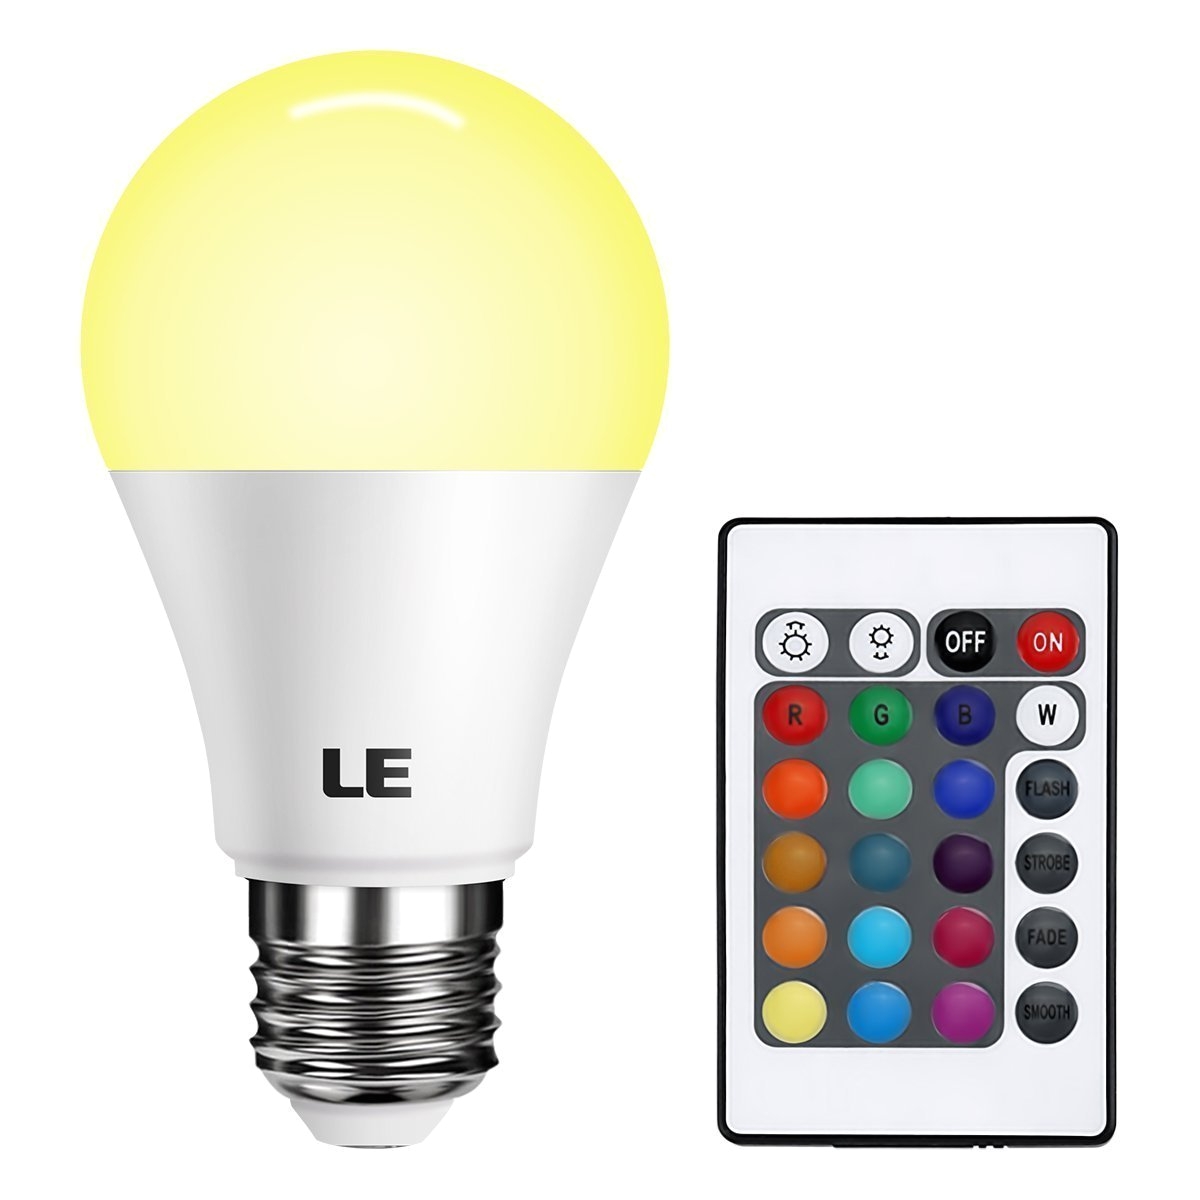 le dimmable a19 e26 led light bulb 6w rgbw led bulbs 16 colors remote controller included led color changing light bulb led household light bulbs